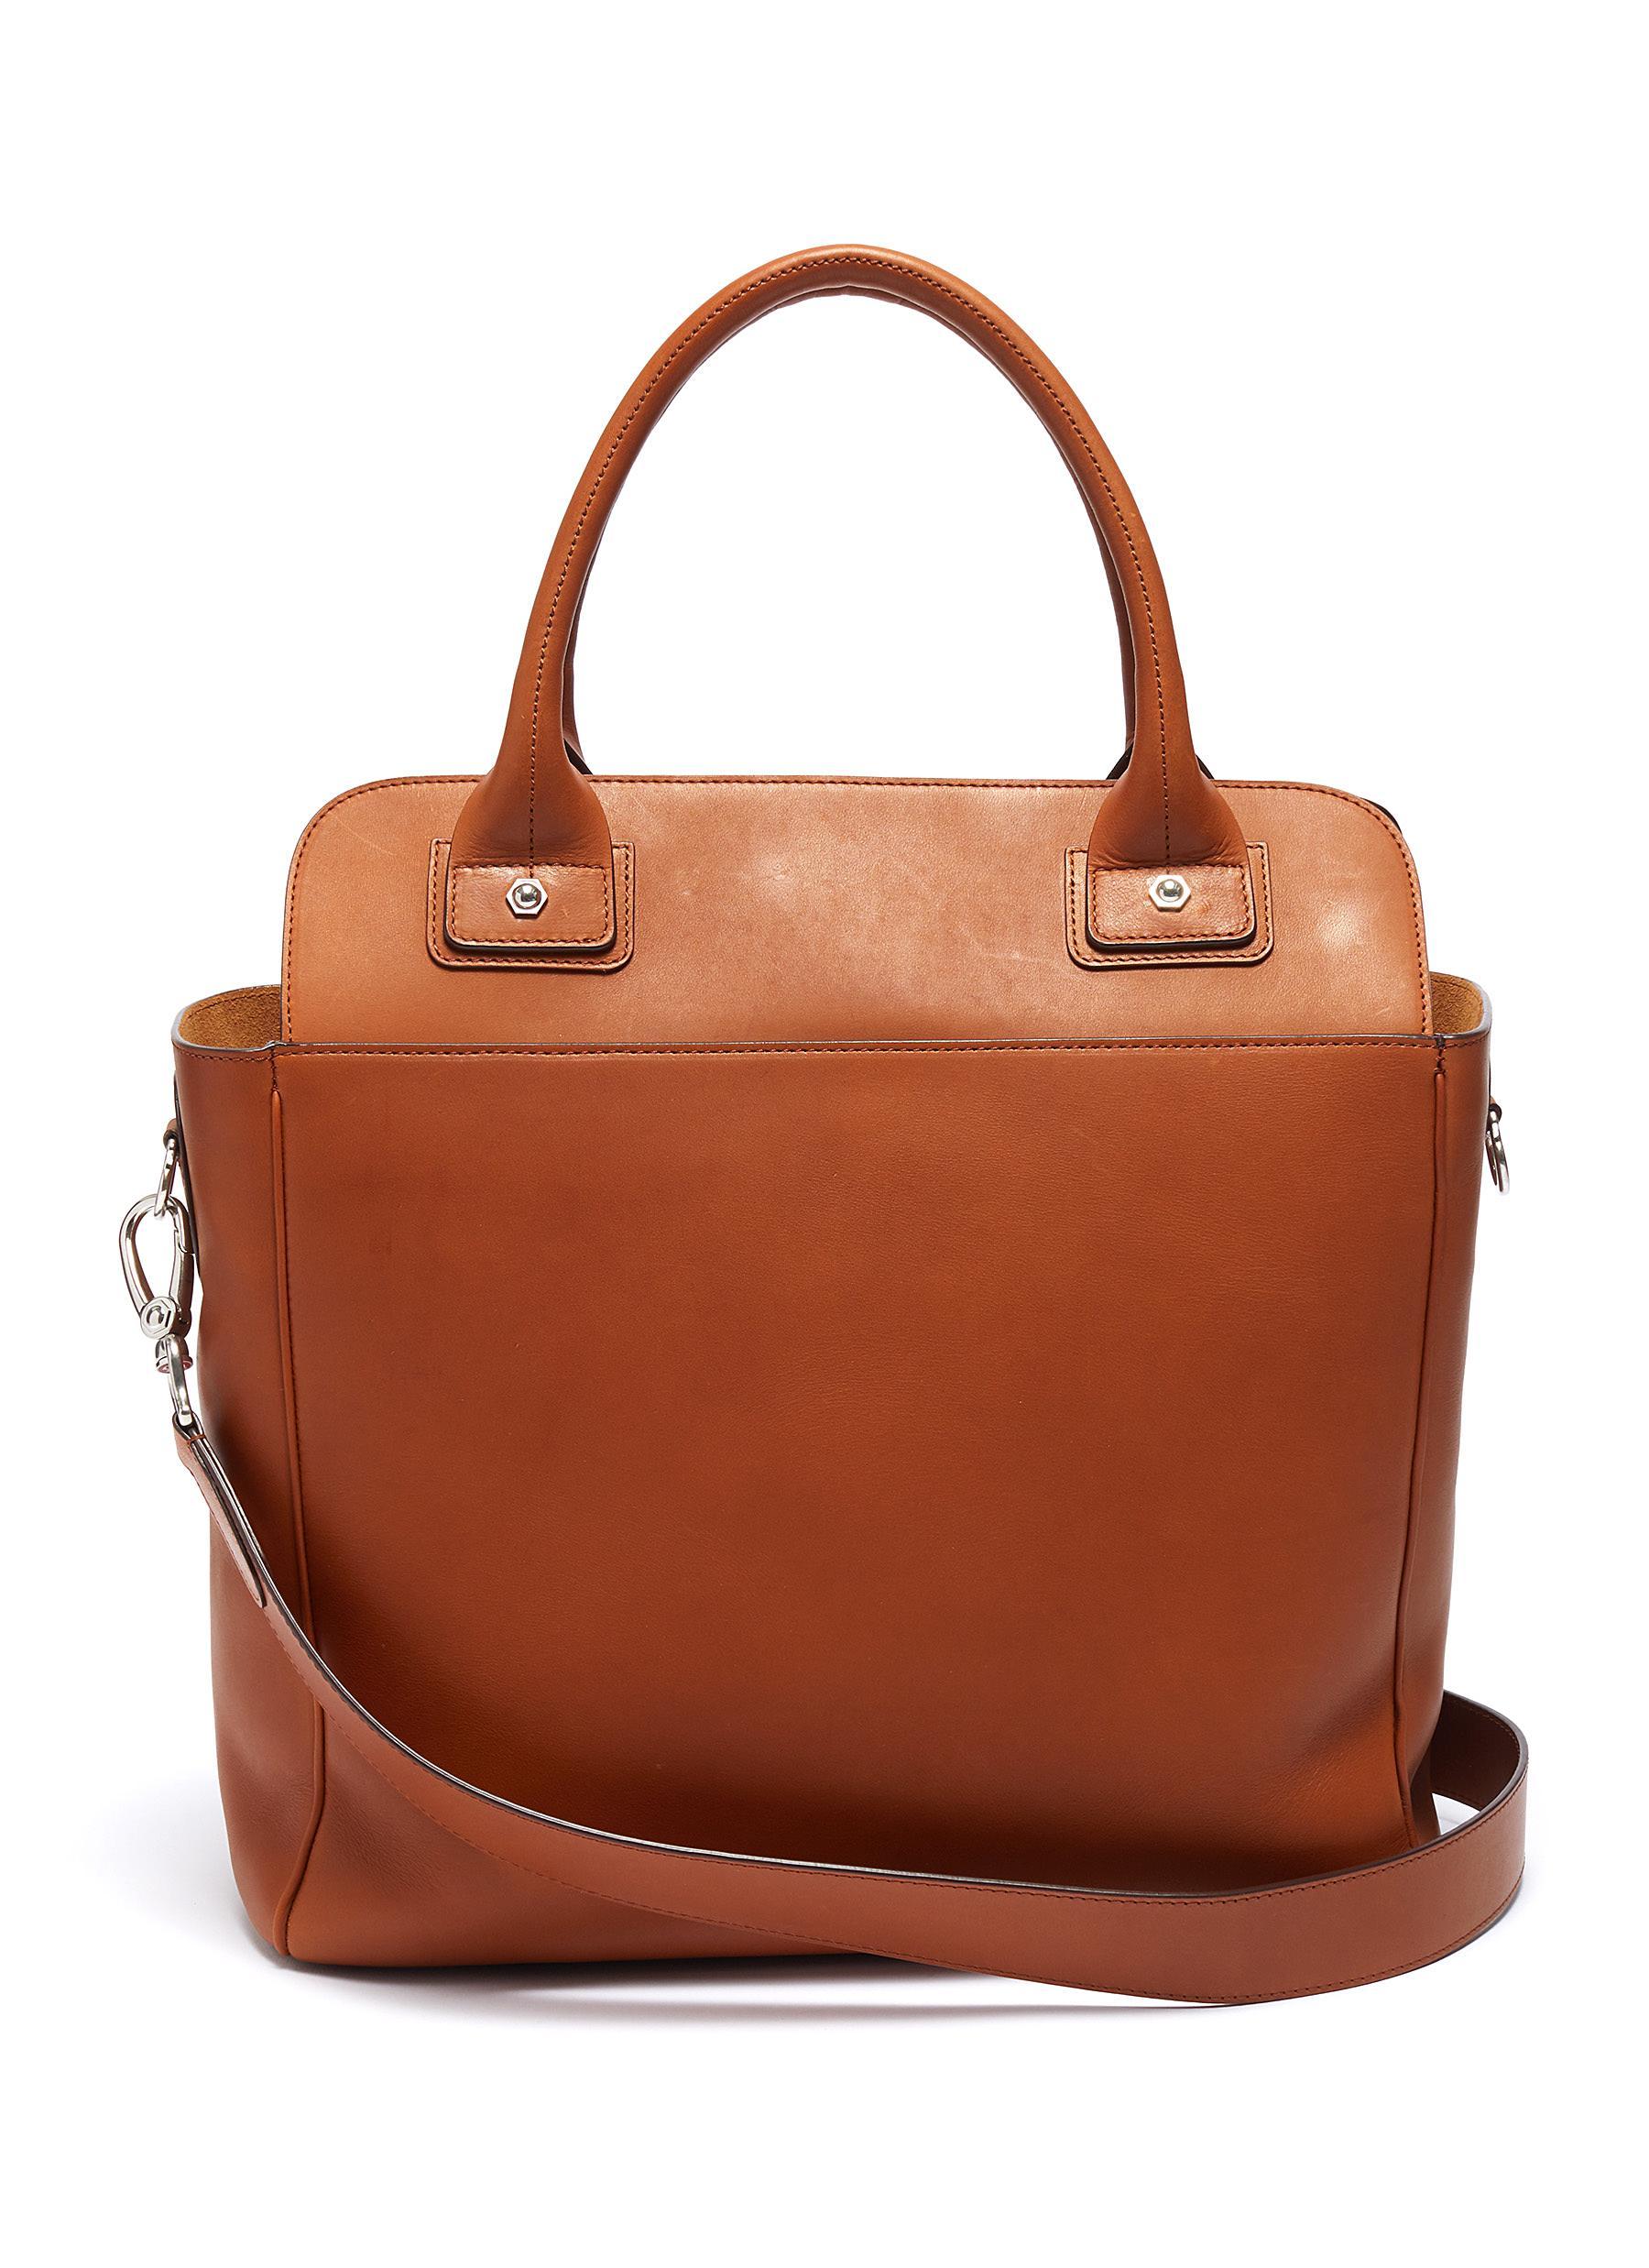 CONNOLLY Leather Deck Bag in Brown for Men - Lyst